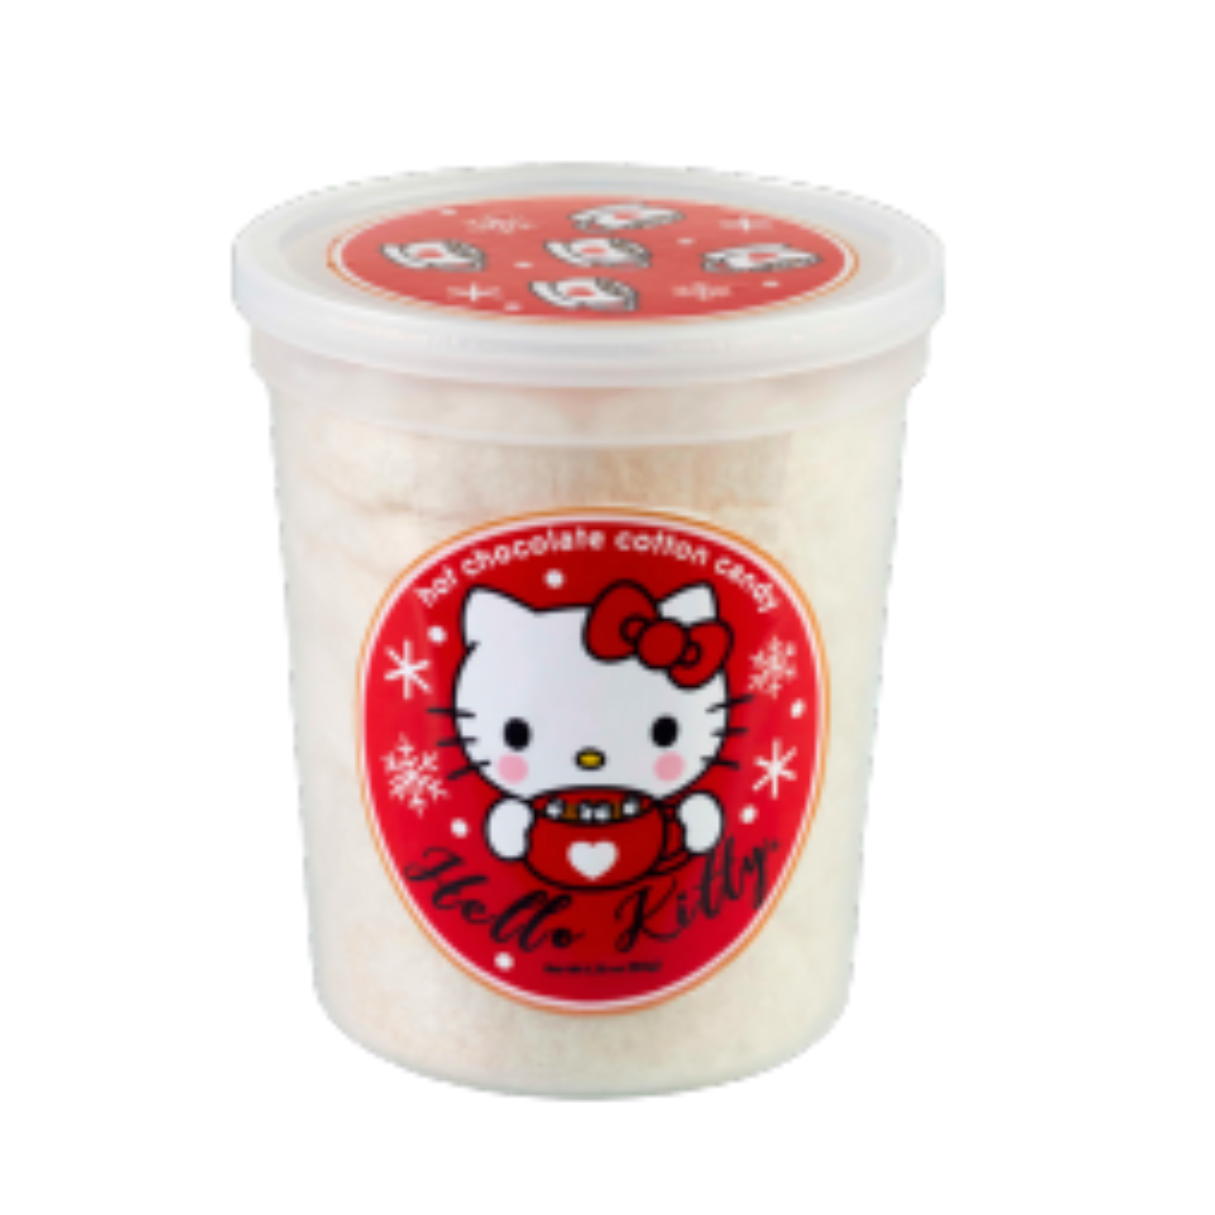 HK Hot Chocolate Cotton Candy 1.75oz - 12ct